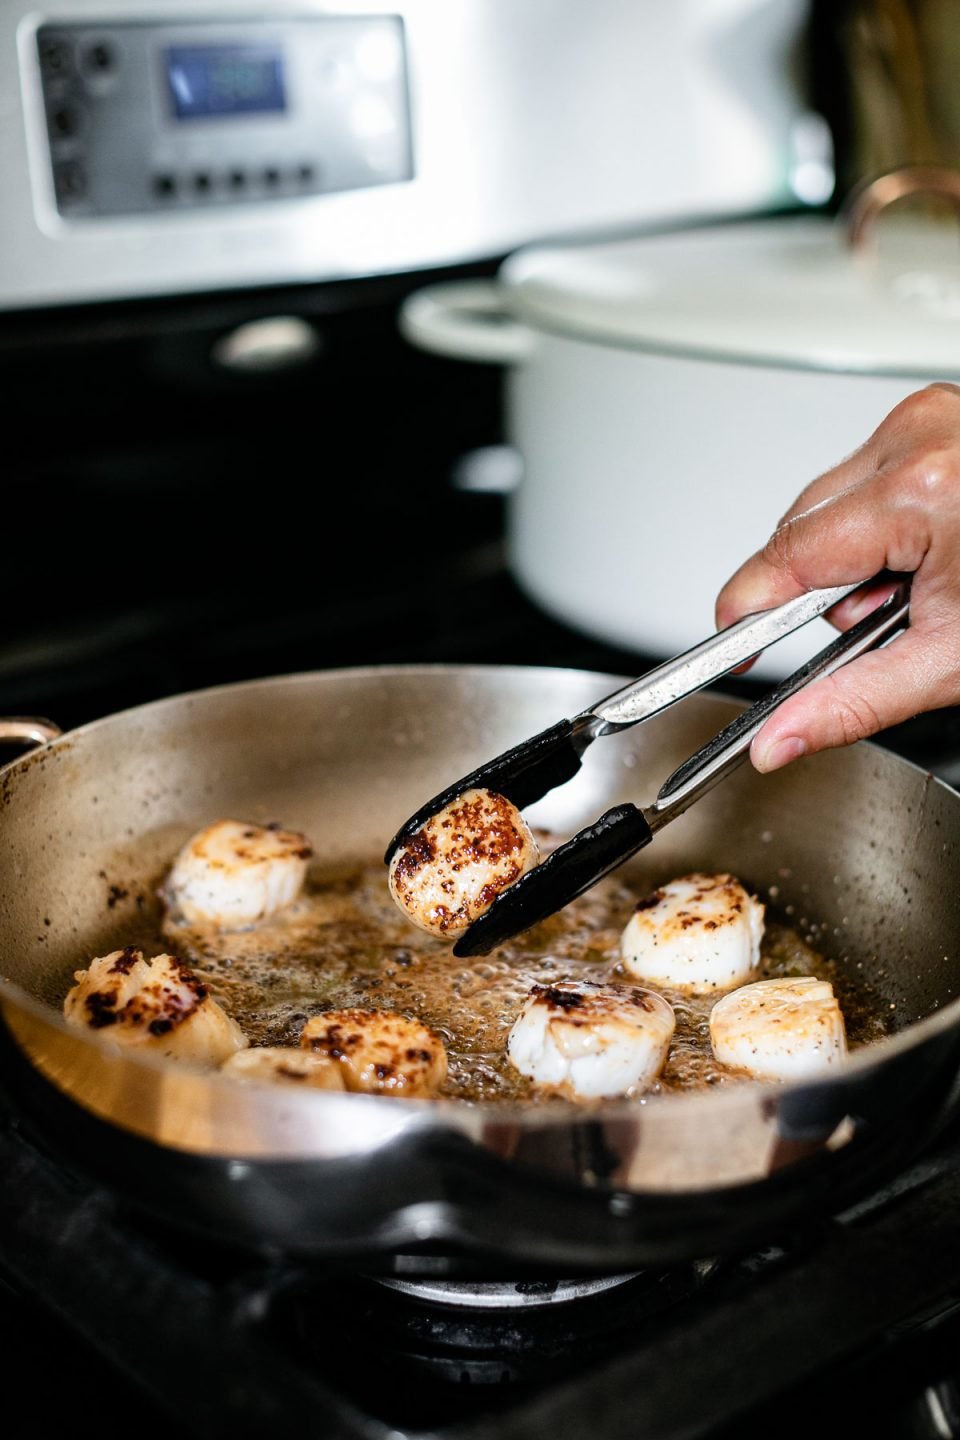 How to sear scallops, Step 3 – A woman's hand shown using small black tongs to flip seared scallops in a stainless steel skillet. The skillet sits atop a gas range with a white Dutch oven in the background.